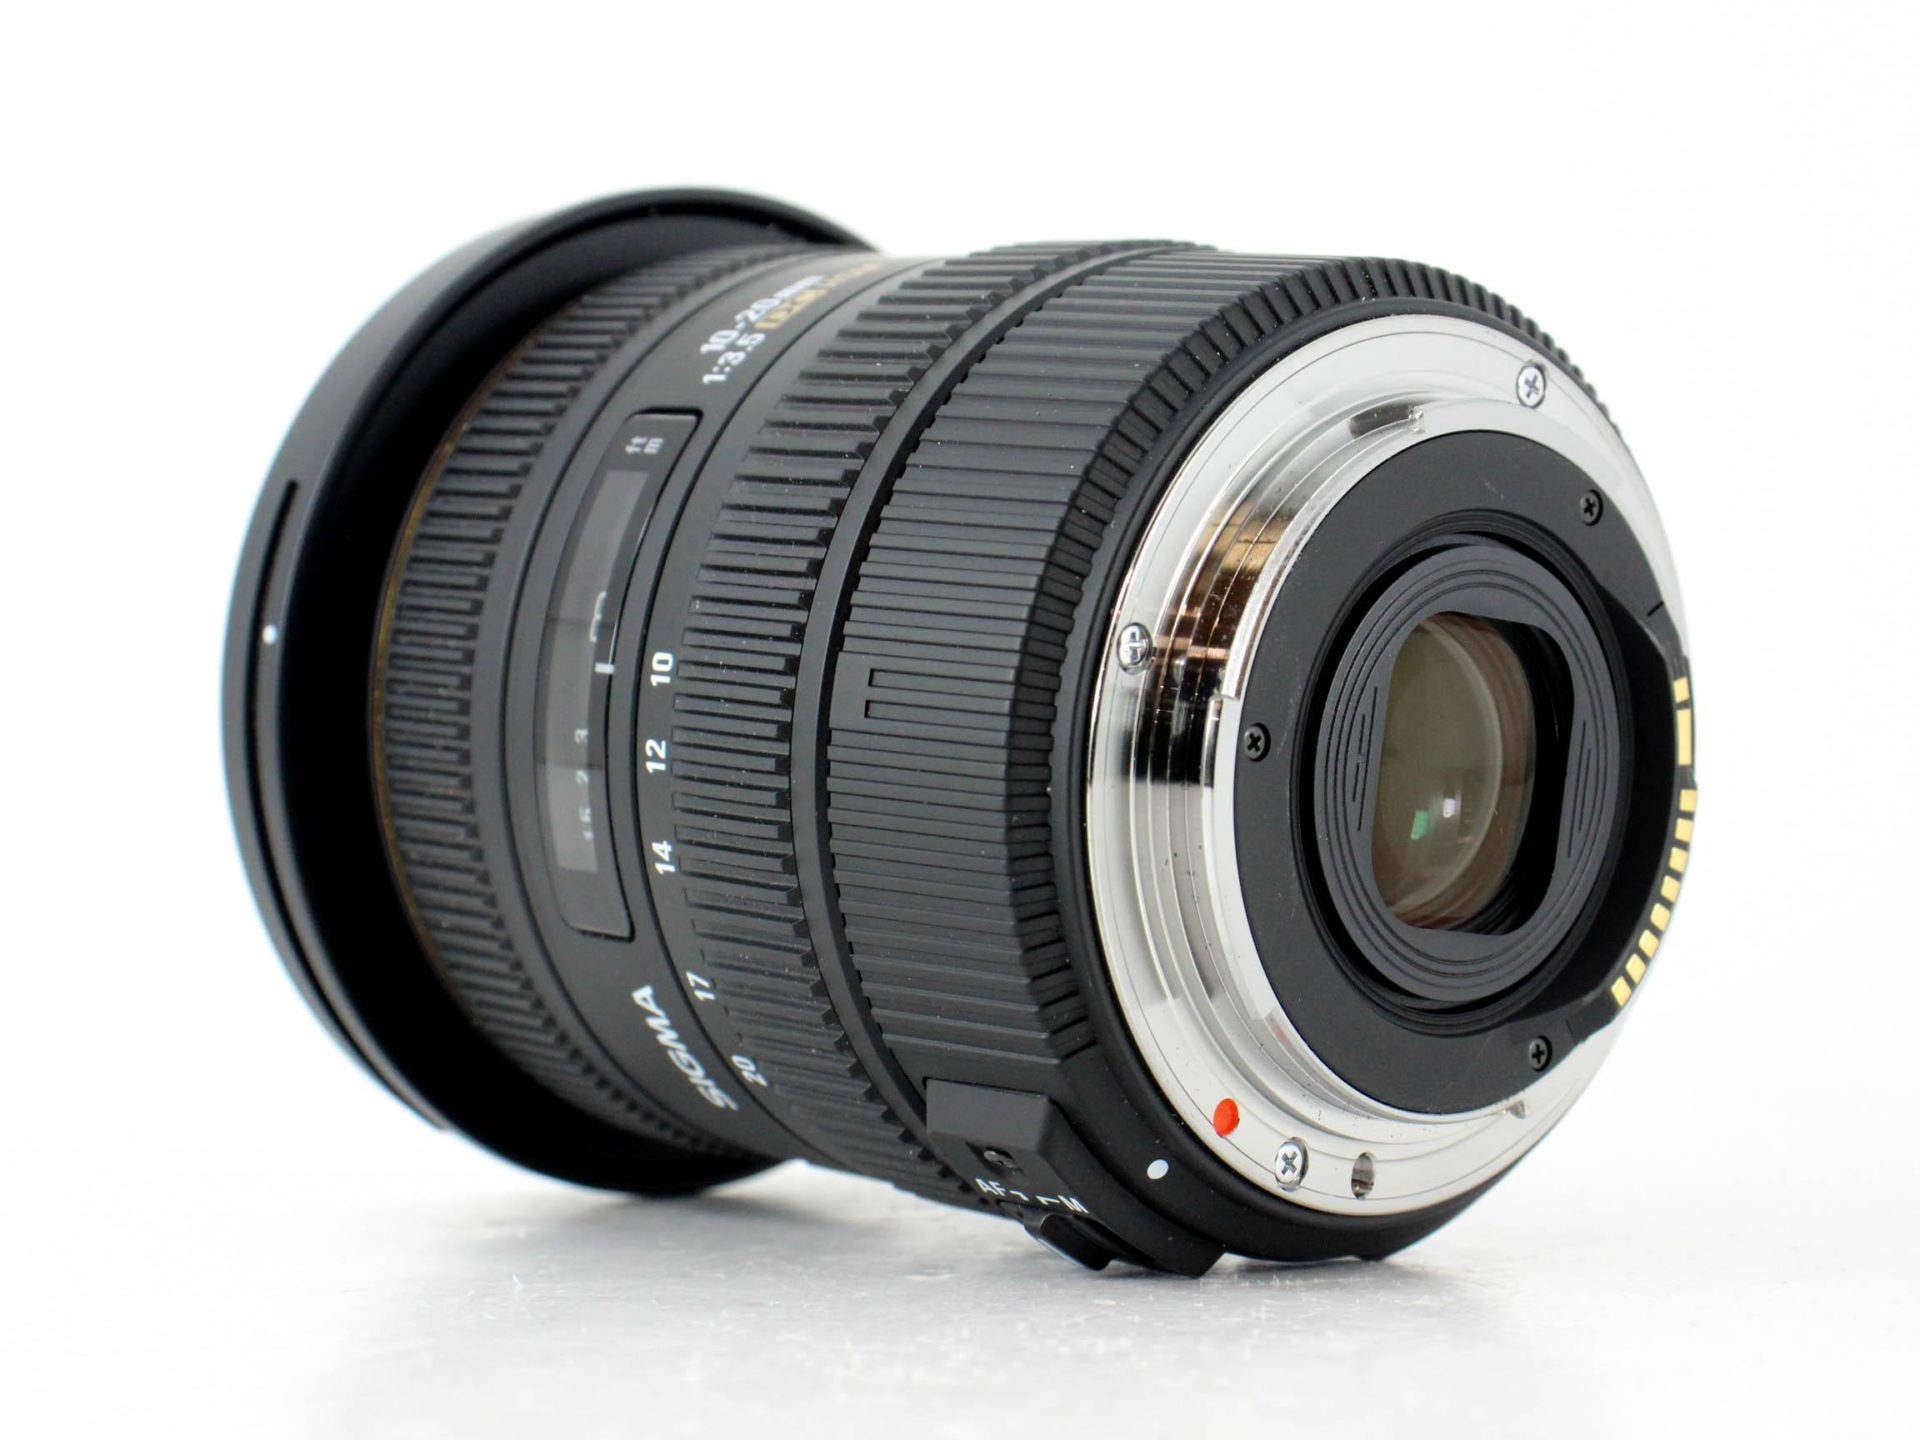 Sigma 10-20mm f/3.5 EX DC HSM Canon EF-S Lens - Lenses and Cameras